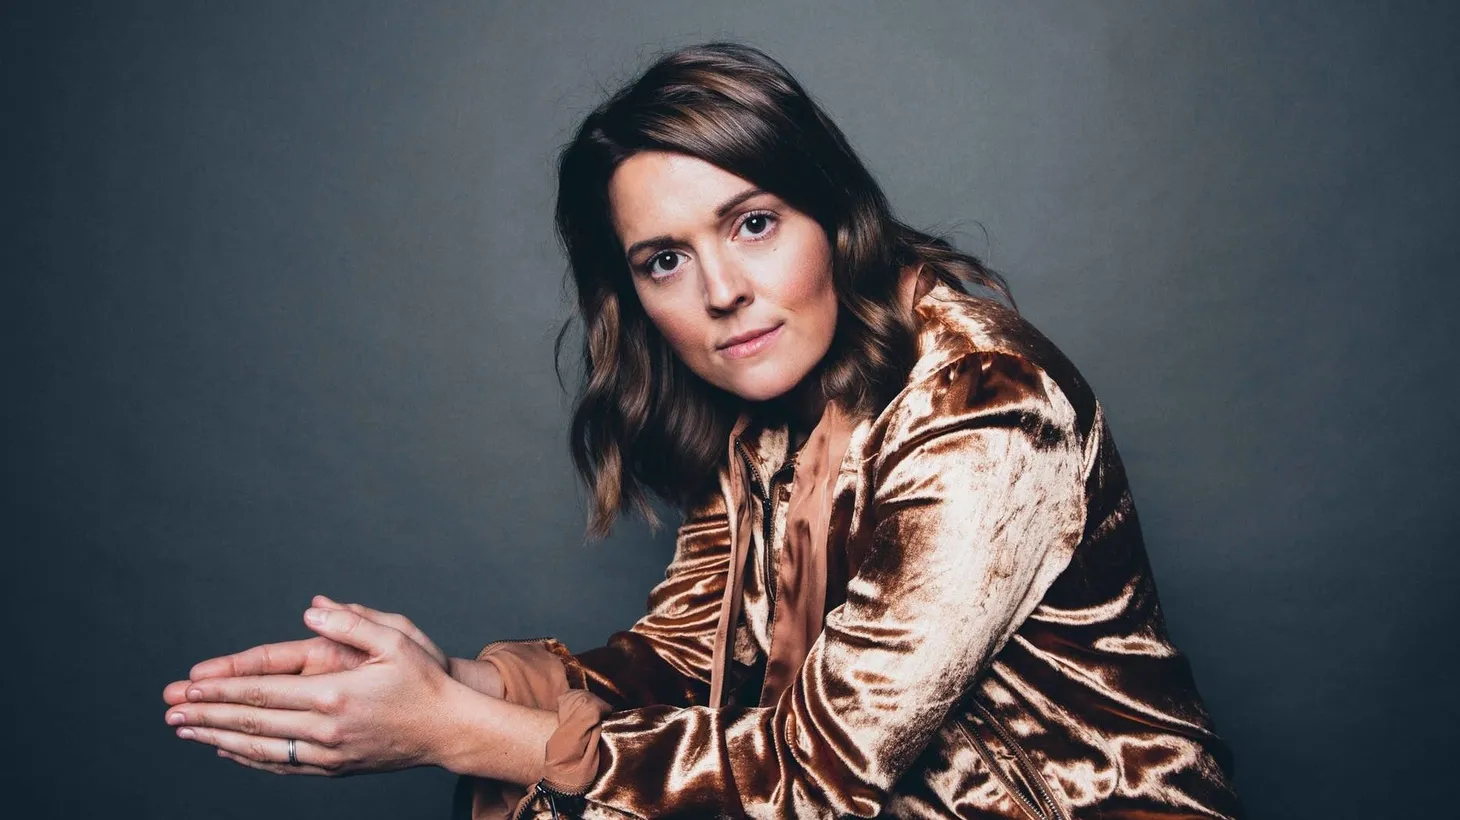 We kick off 2018’s live performance calendar with one of our favorite singer-songwriters – Brandi Carlile. She’s here to play new songs in advance of the February release date for her album By The Way, I Forgive You.